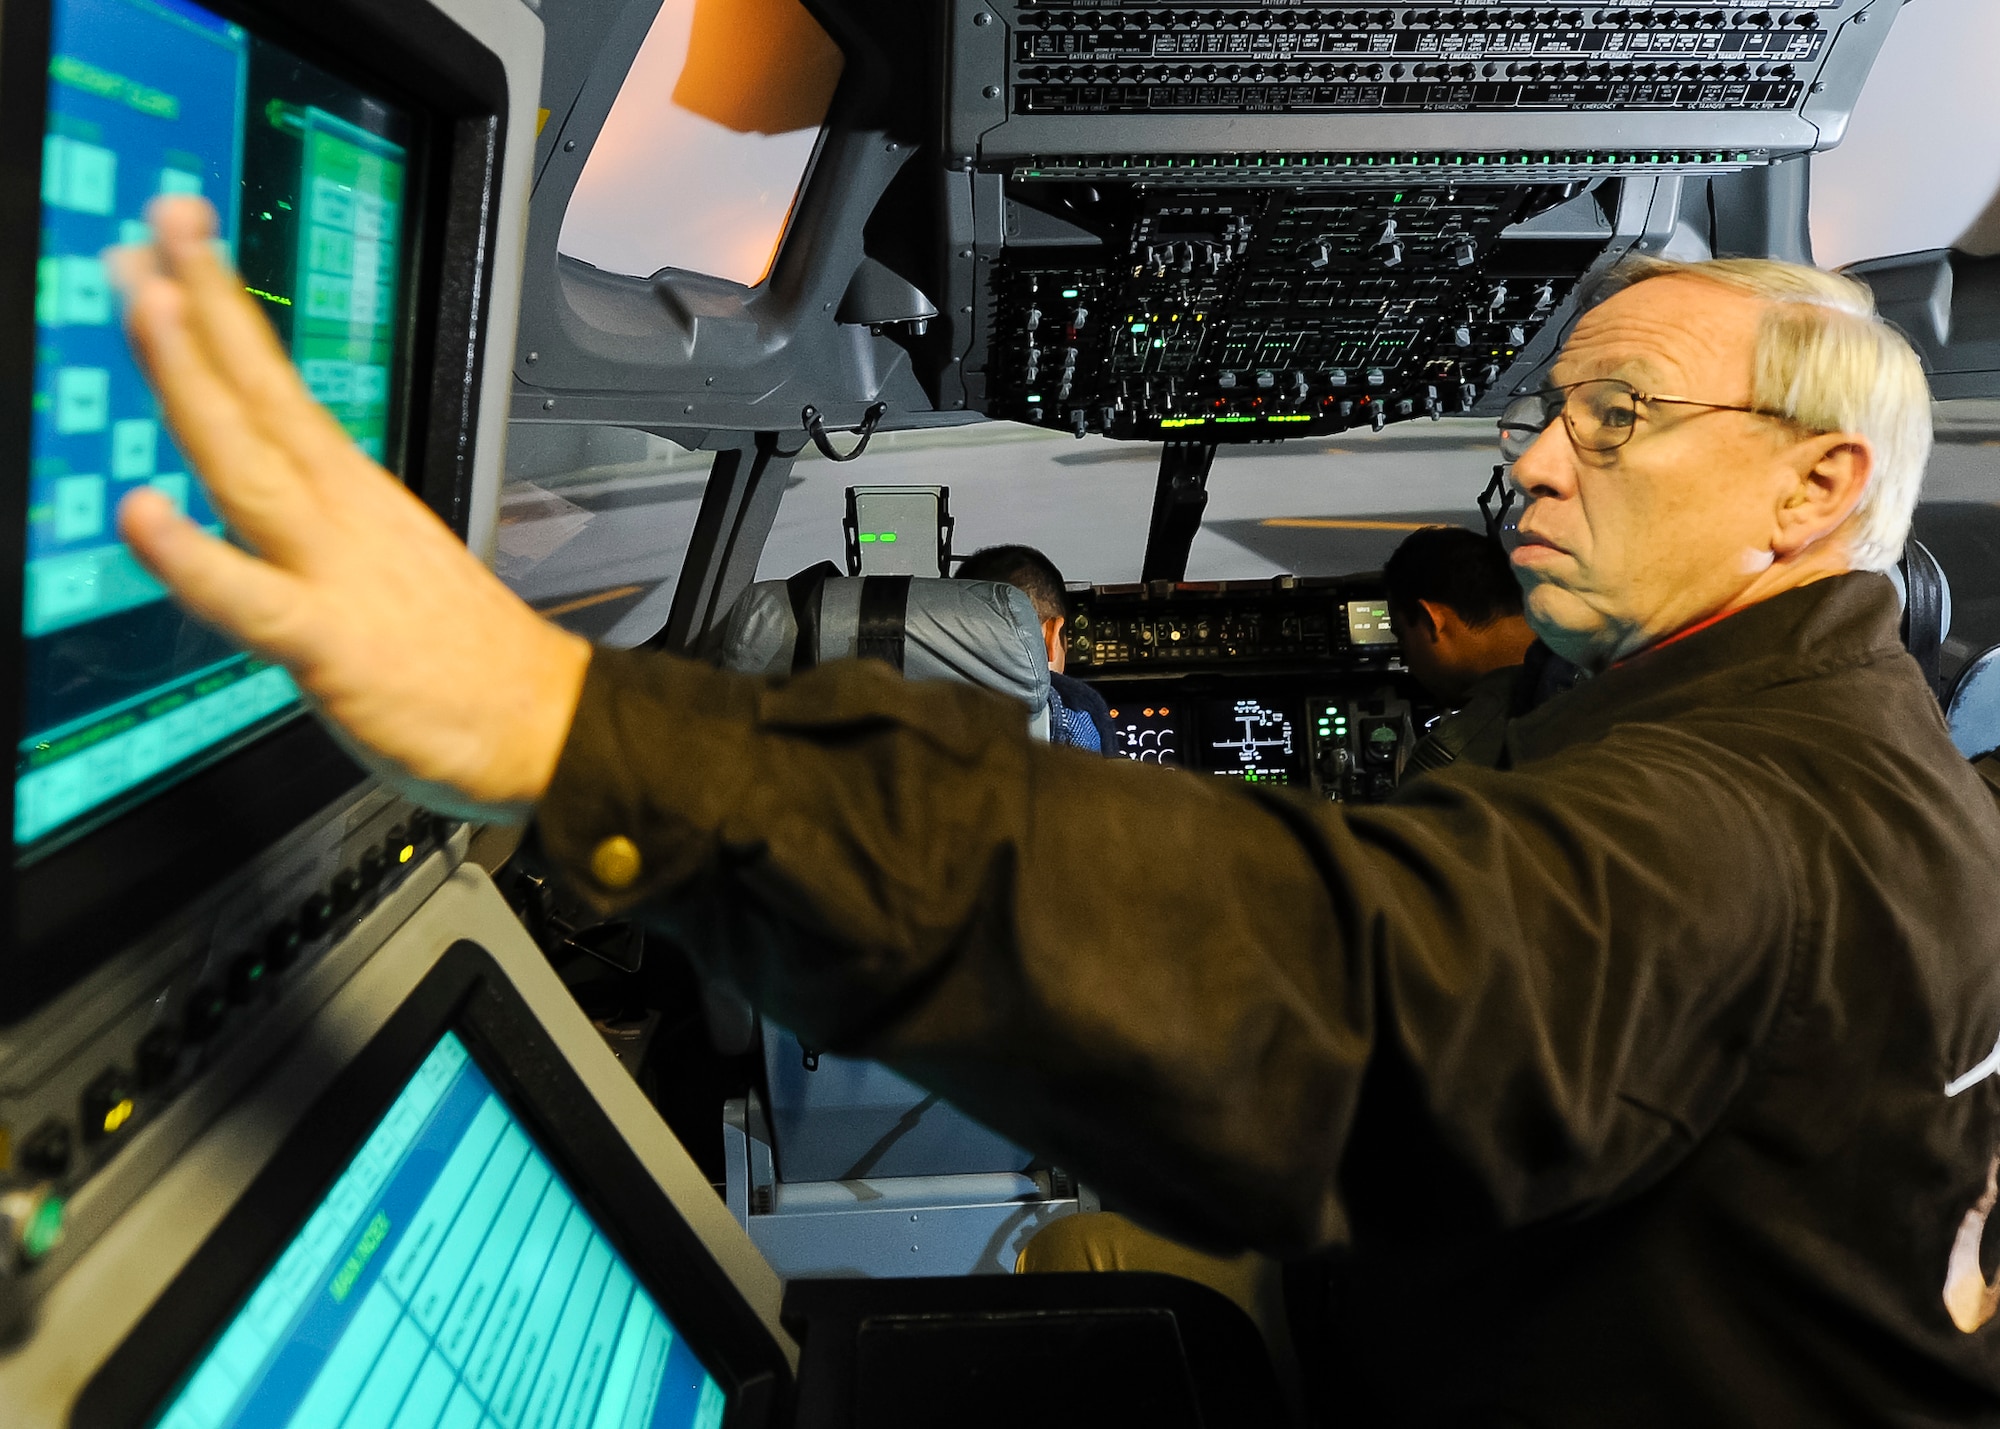 ALTUS AIR FORCE BASE, Okla. – Retired U.S. Air Force Maj. Cary Davidson, L-3 Communications C-17 Globemaster III simulator instructor, reviews international student pilot actions inside a C-17 simulator, Sept. 25. Davidson first began instructing students on the C-141 Starlifter when he was assigned to the 57th Airlift Squadron here in 1988. Twenty-five years later, Davidson has retired and come back to Altus to work for L-3 Communications as a C-17 simulator instructor. (U.S. Air Force photo by Airman 1st Class Levin Boland/Released)